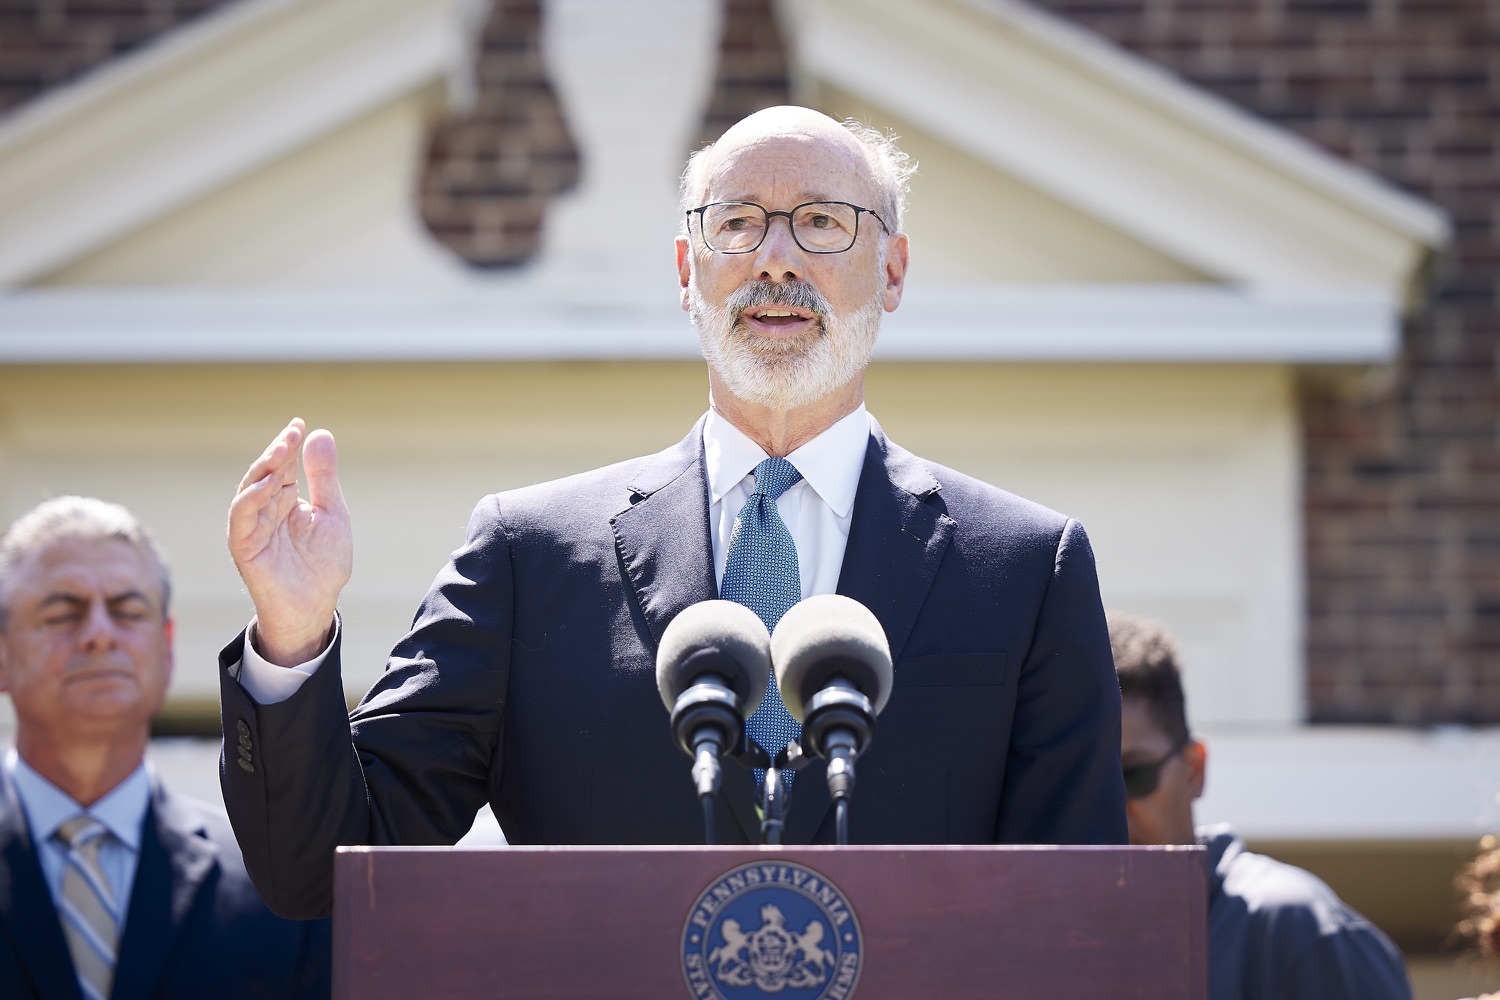 Pennsylvania Governor Tom Wolf speaks with the press.   Governor Tom Wolf was joined by state Representative David Delloso and stakeholders and community members to discuss the reintroduction of the PA Opportunity Program, which would send $2,000 checks directly to Pennsylvanians. I first proposed the PA Opportunity Program back in February, but Republican leaders in the General Assembly just wouldnt get on board with funding it in this years budget, said Gov. Wolf. However, as Ive traveled the commonwealth, Ive heard directly from so many people about how much this program would mean to them and their families. Im not going to stop fighting until the people of Pennsylvania get the help they need and deserve. Folcroft, PA  August 2, 2022<br><a href="https://filesource.amperwave.net/commonwealthofpa/photo/22070_gov_opportunityFund_dz_007.JPG" target="_blank">⇣ Download Photo</a>